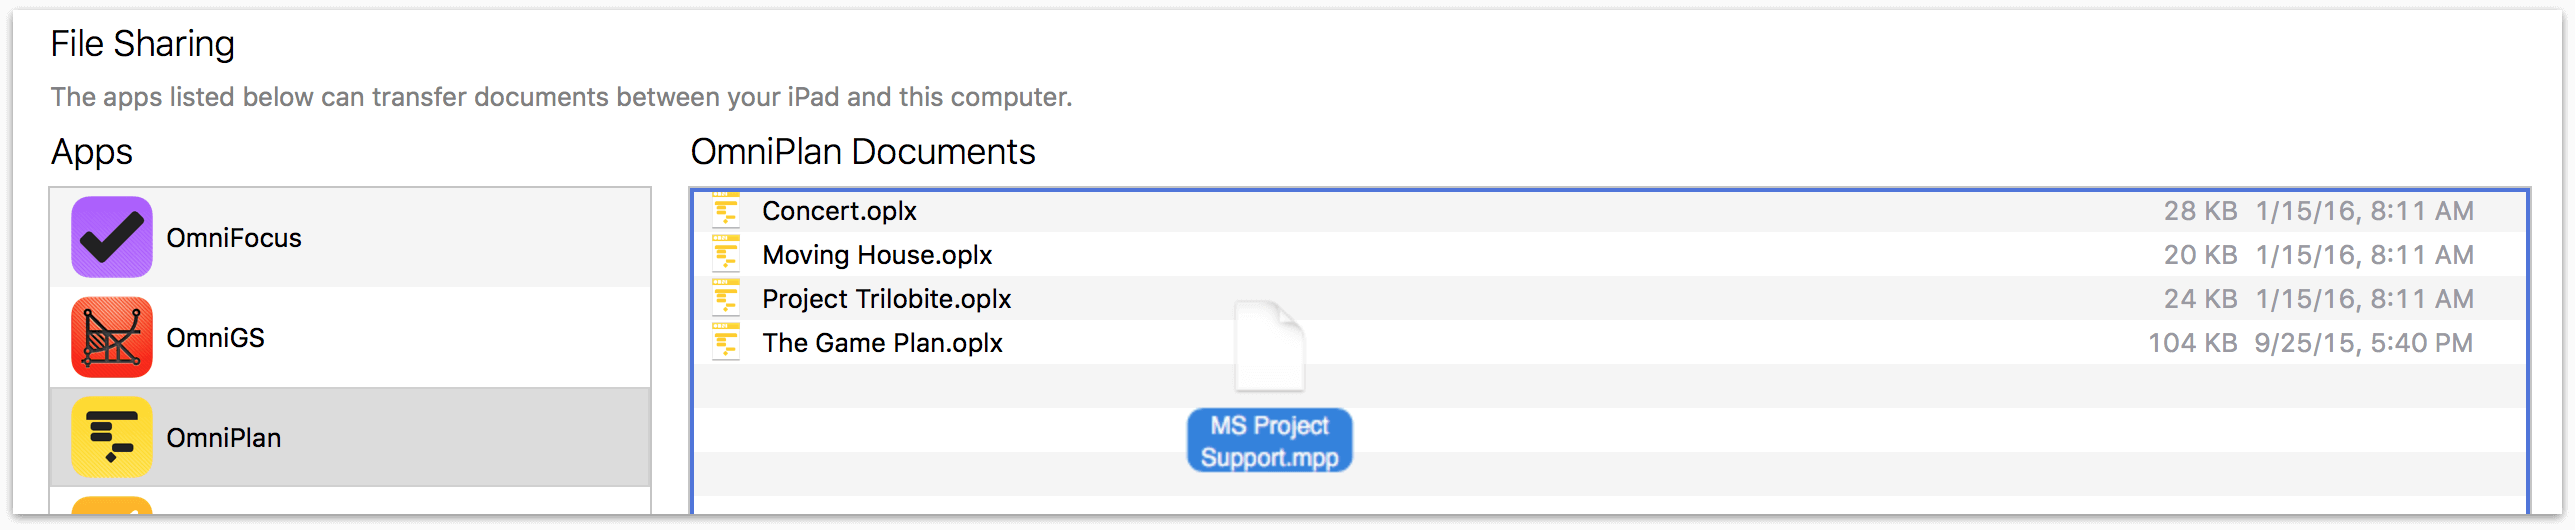 Importing a Microsoft Project document with iTunes on macOS.